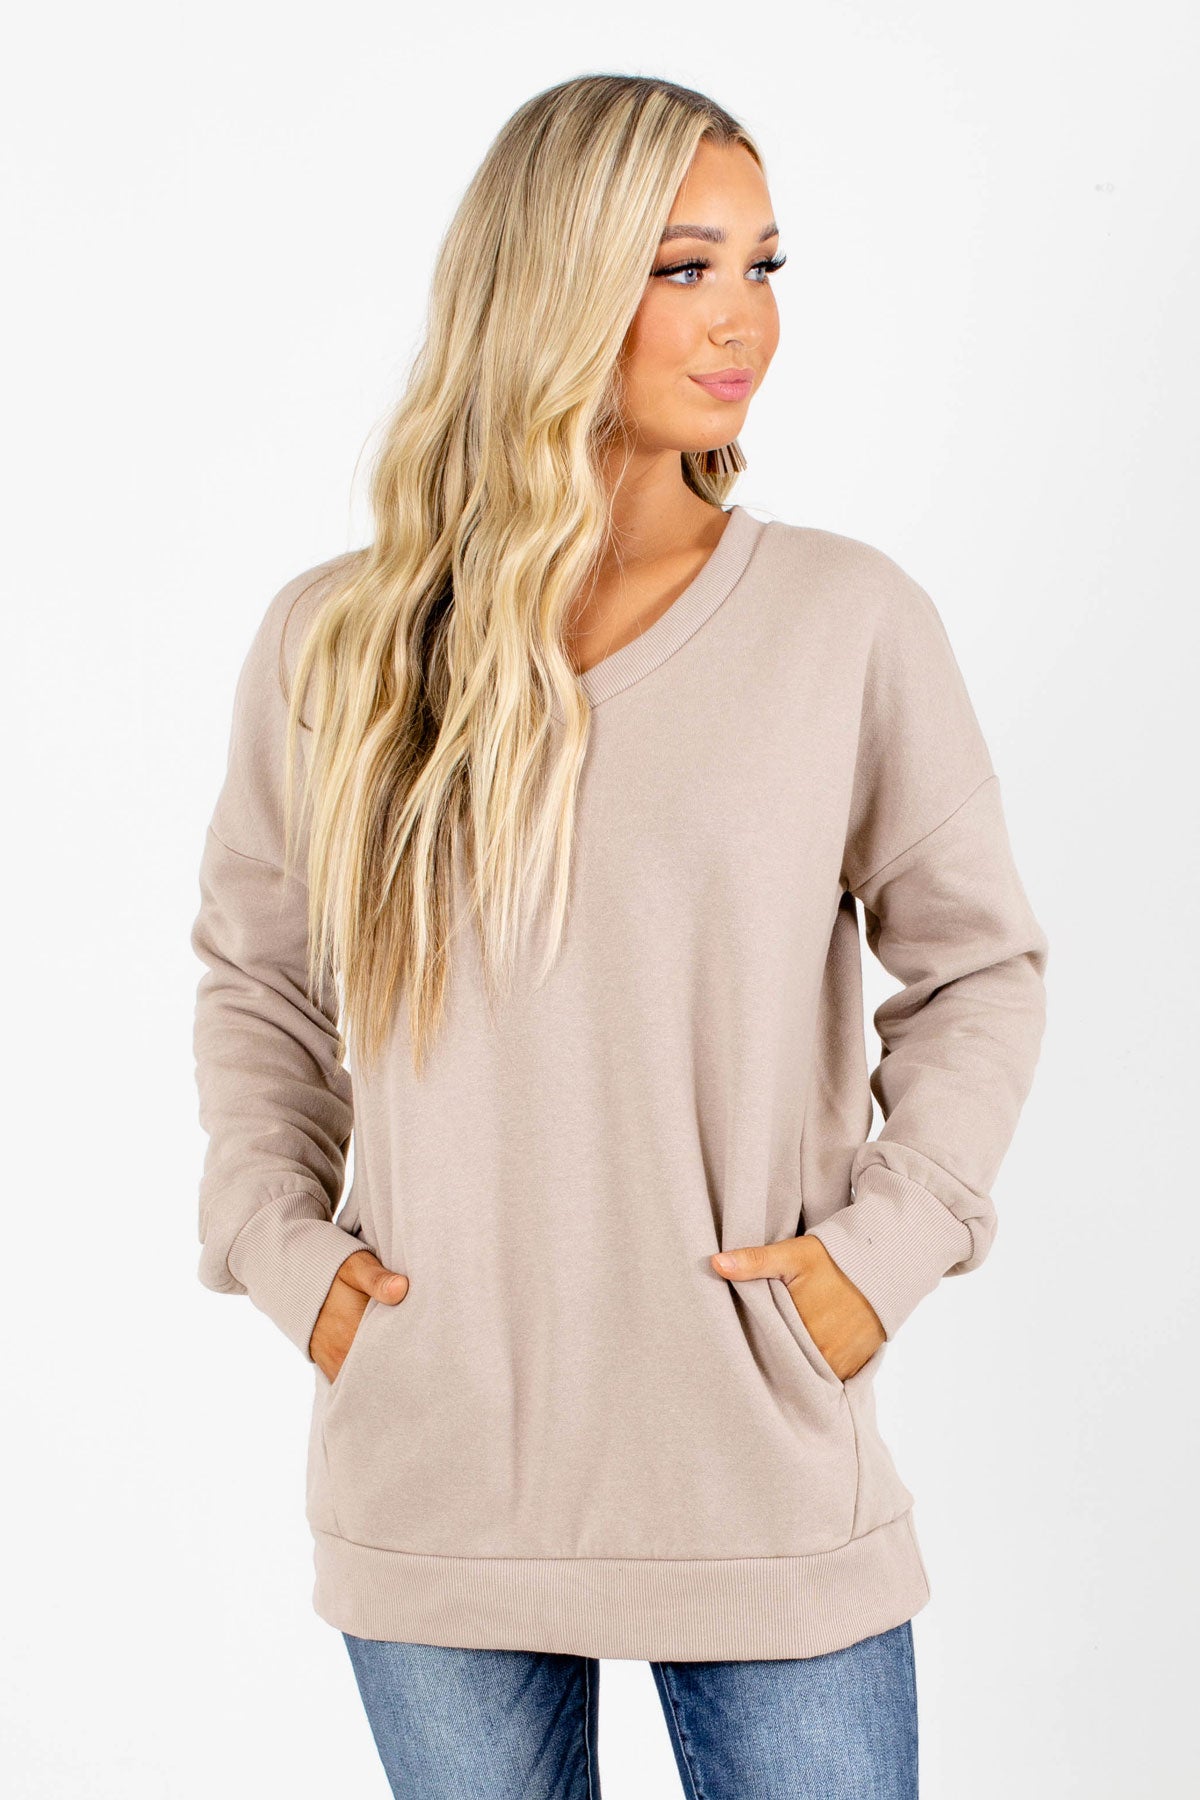 Tan Pullover Sweater Women's Boutique